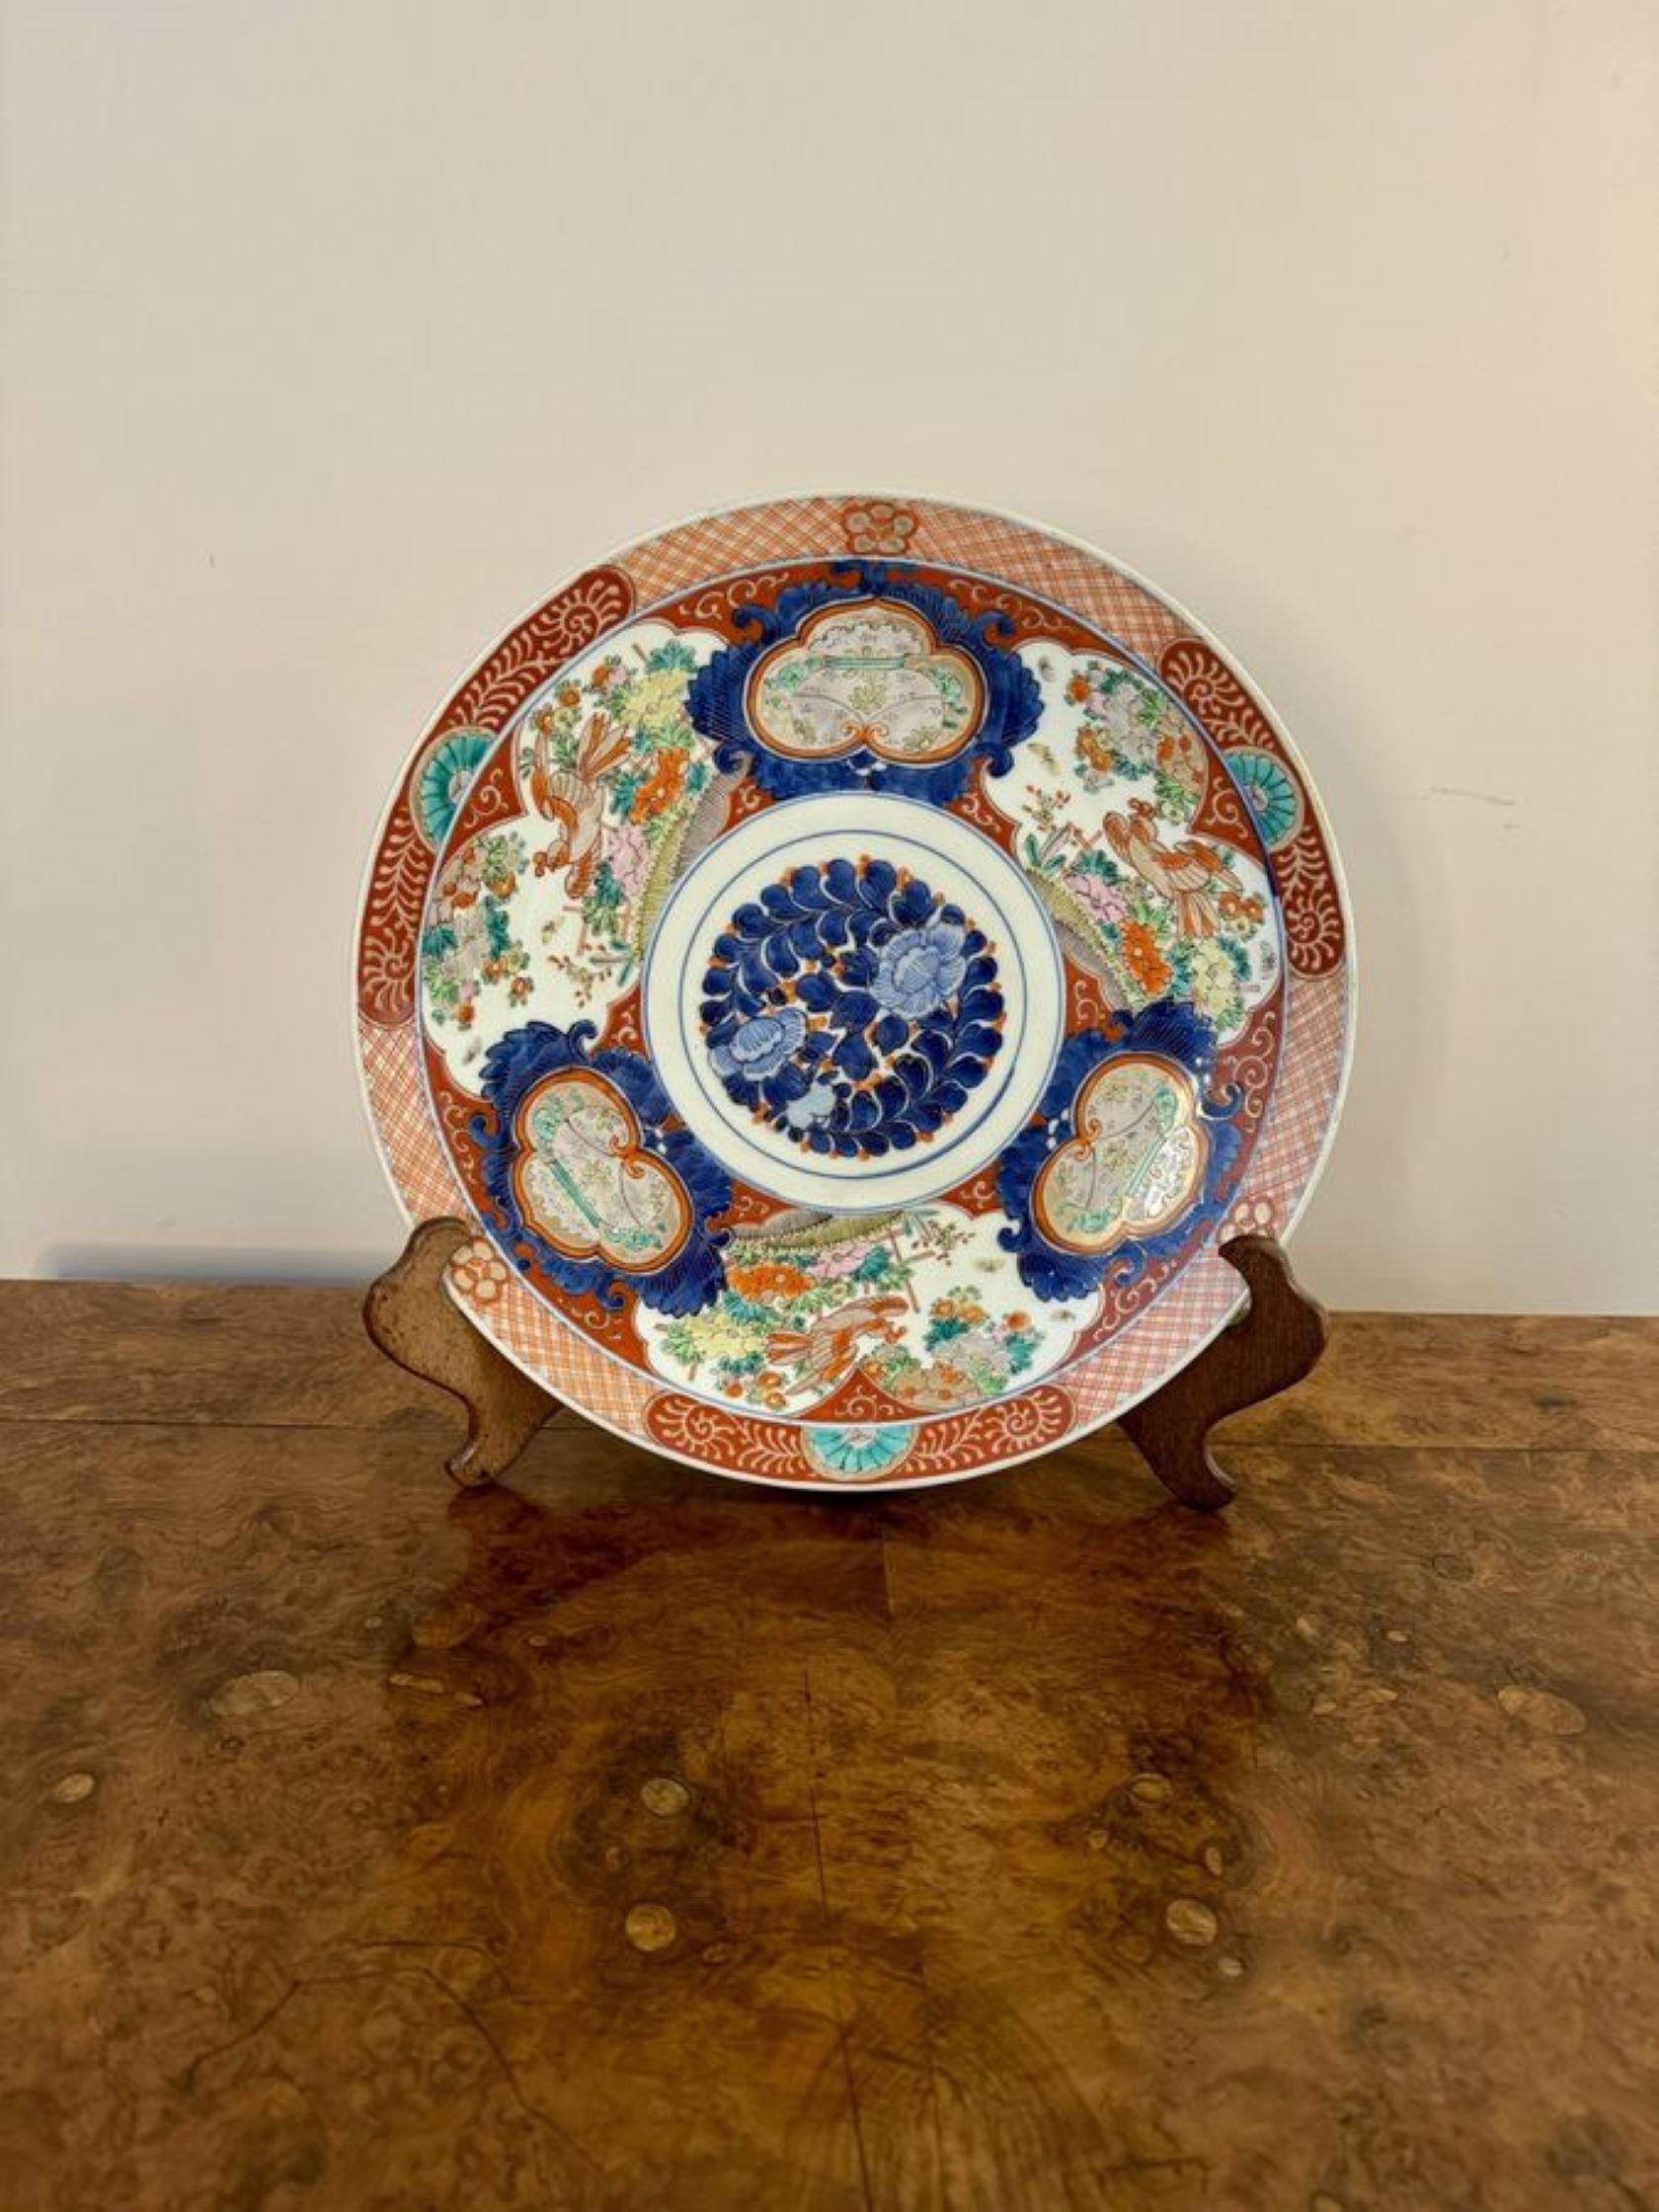 Stunning quality antique Japanese imari porcelain large plate, having a large antique Japanese imari plate, decorated with flowers and leaves in a circular centre in wonderful blue and red colours, surrounded by panels with birds, trees, flowers and